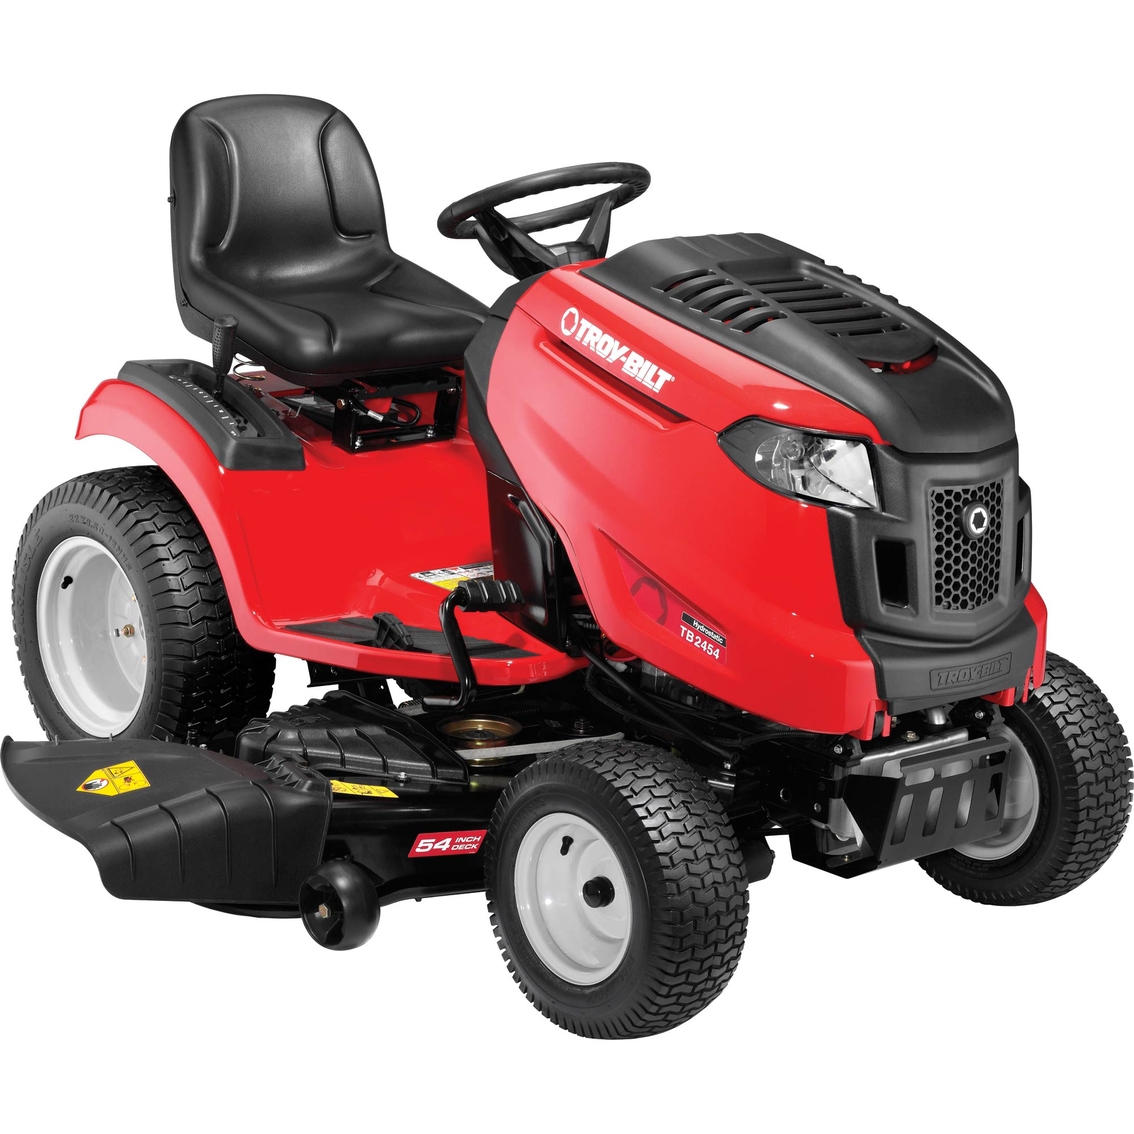 Troy-Bilt 54 in. Riding Mower - Image 1 of 2